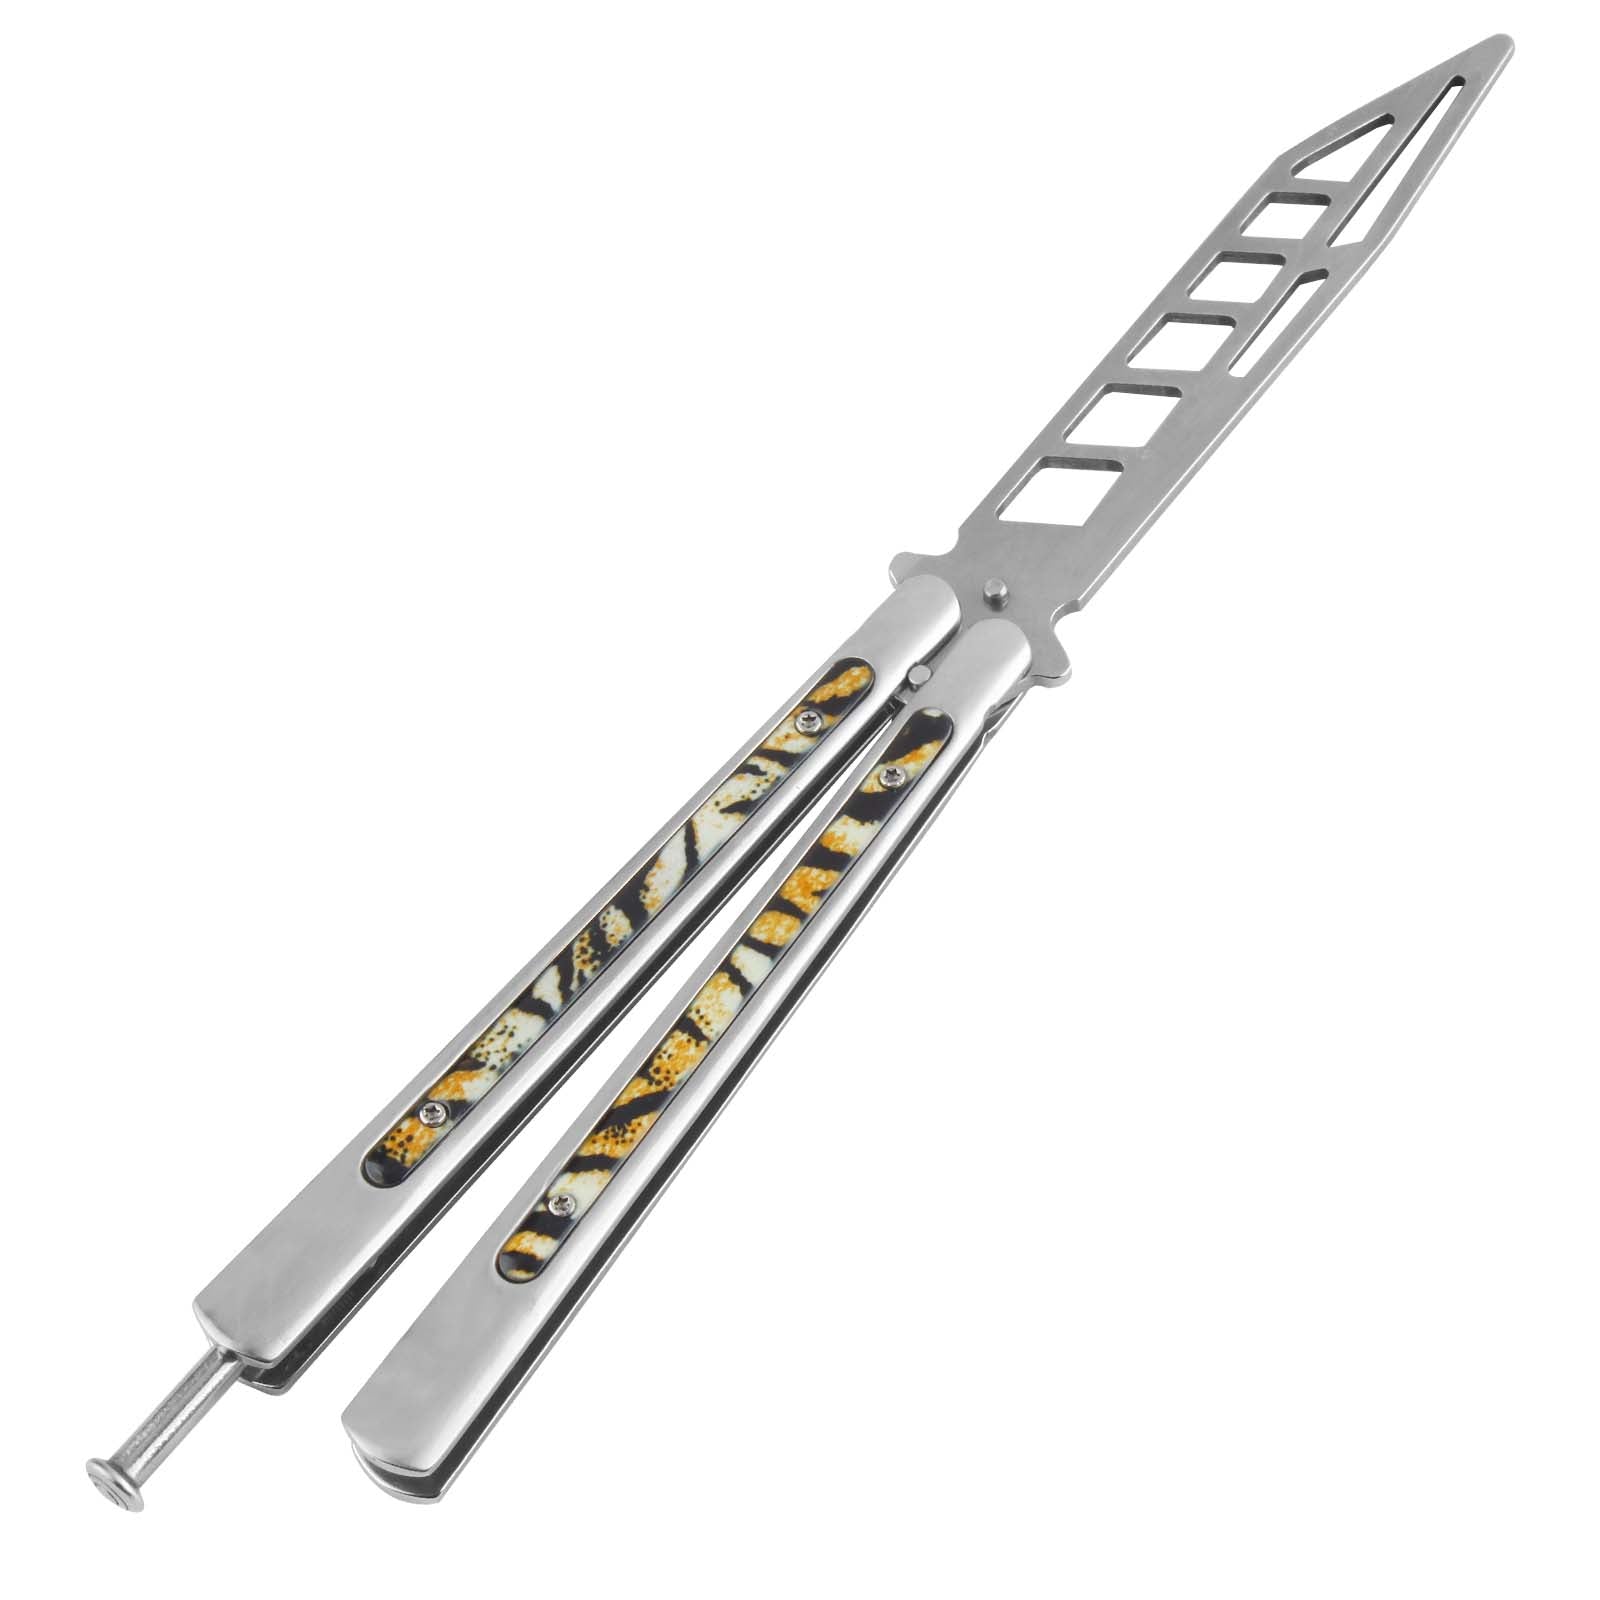 Andux Balisong Foldable CSGO Flip Training Tool No Screws(Only Available in European Countries)